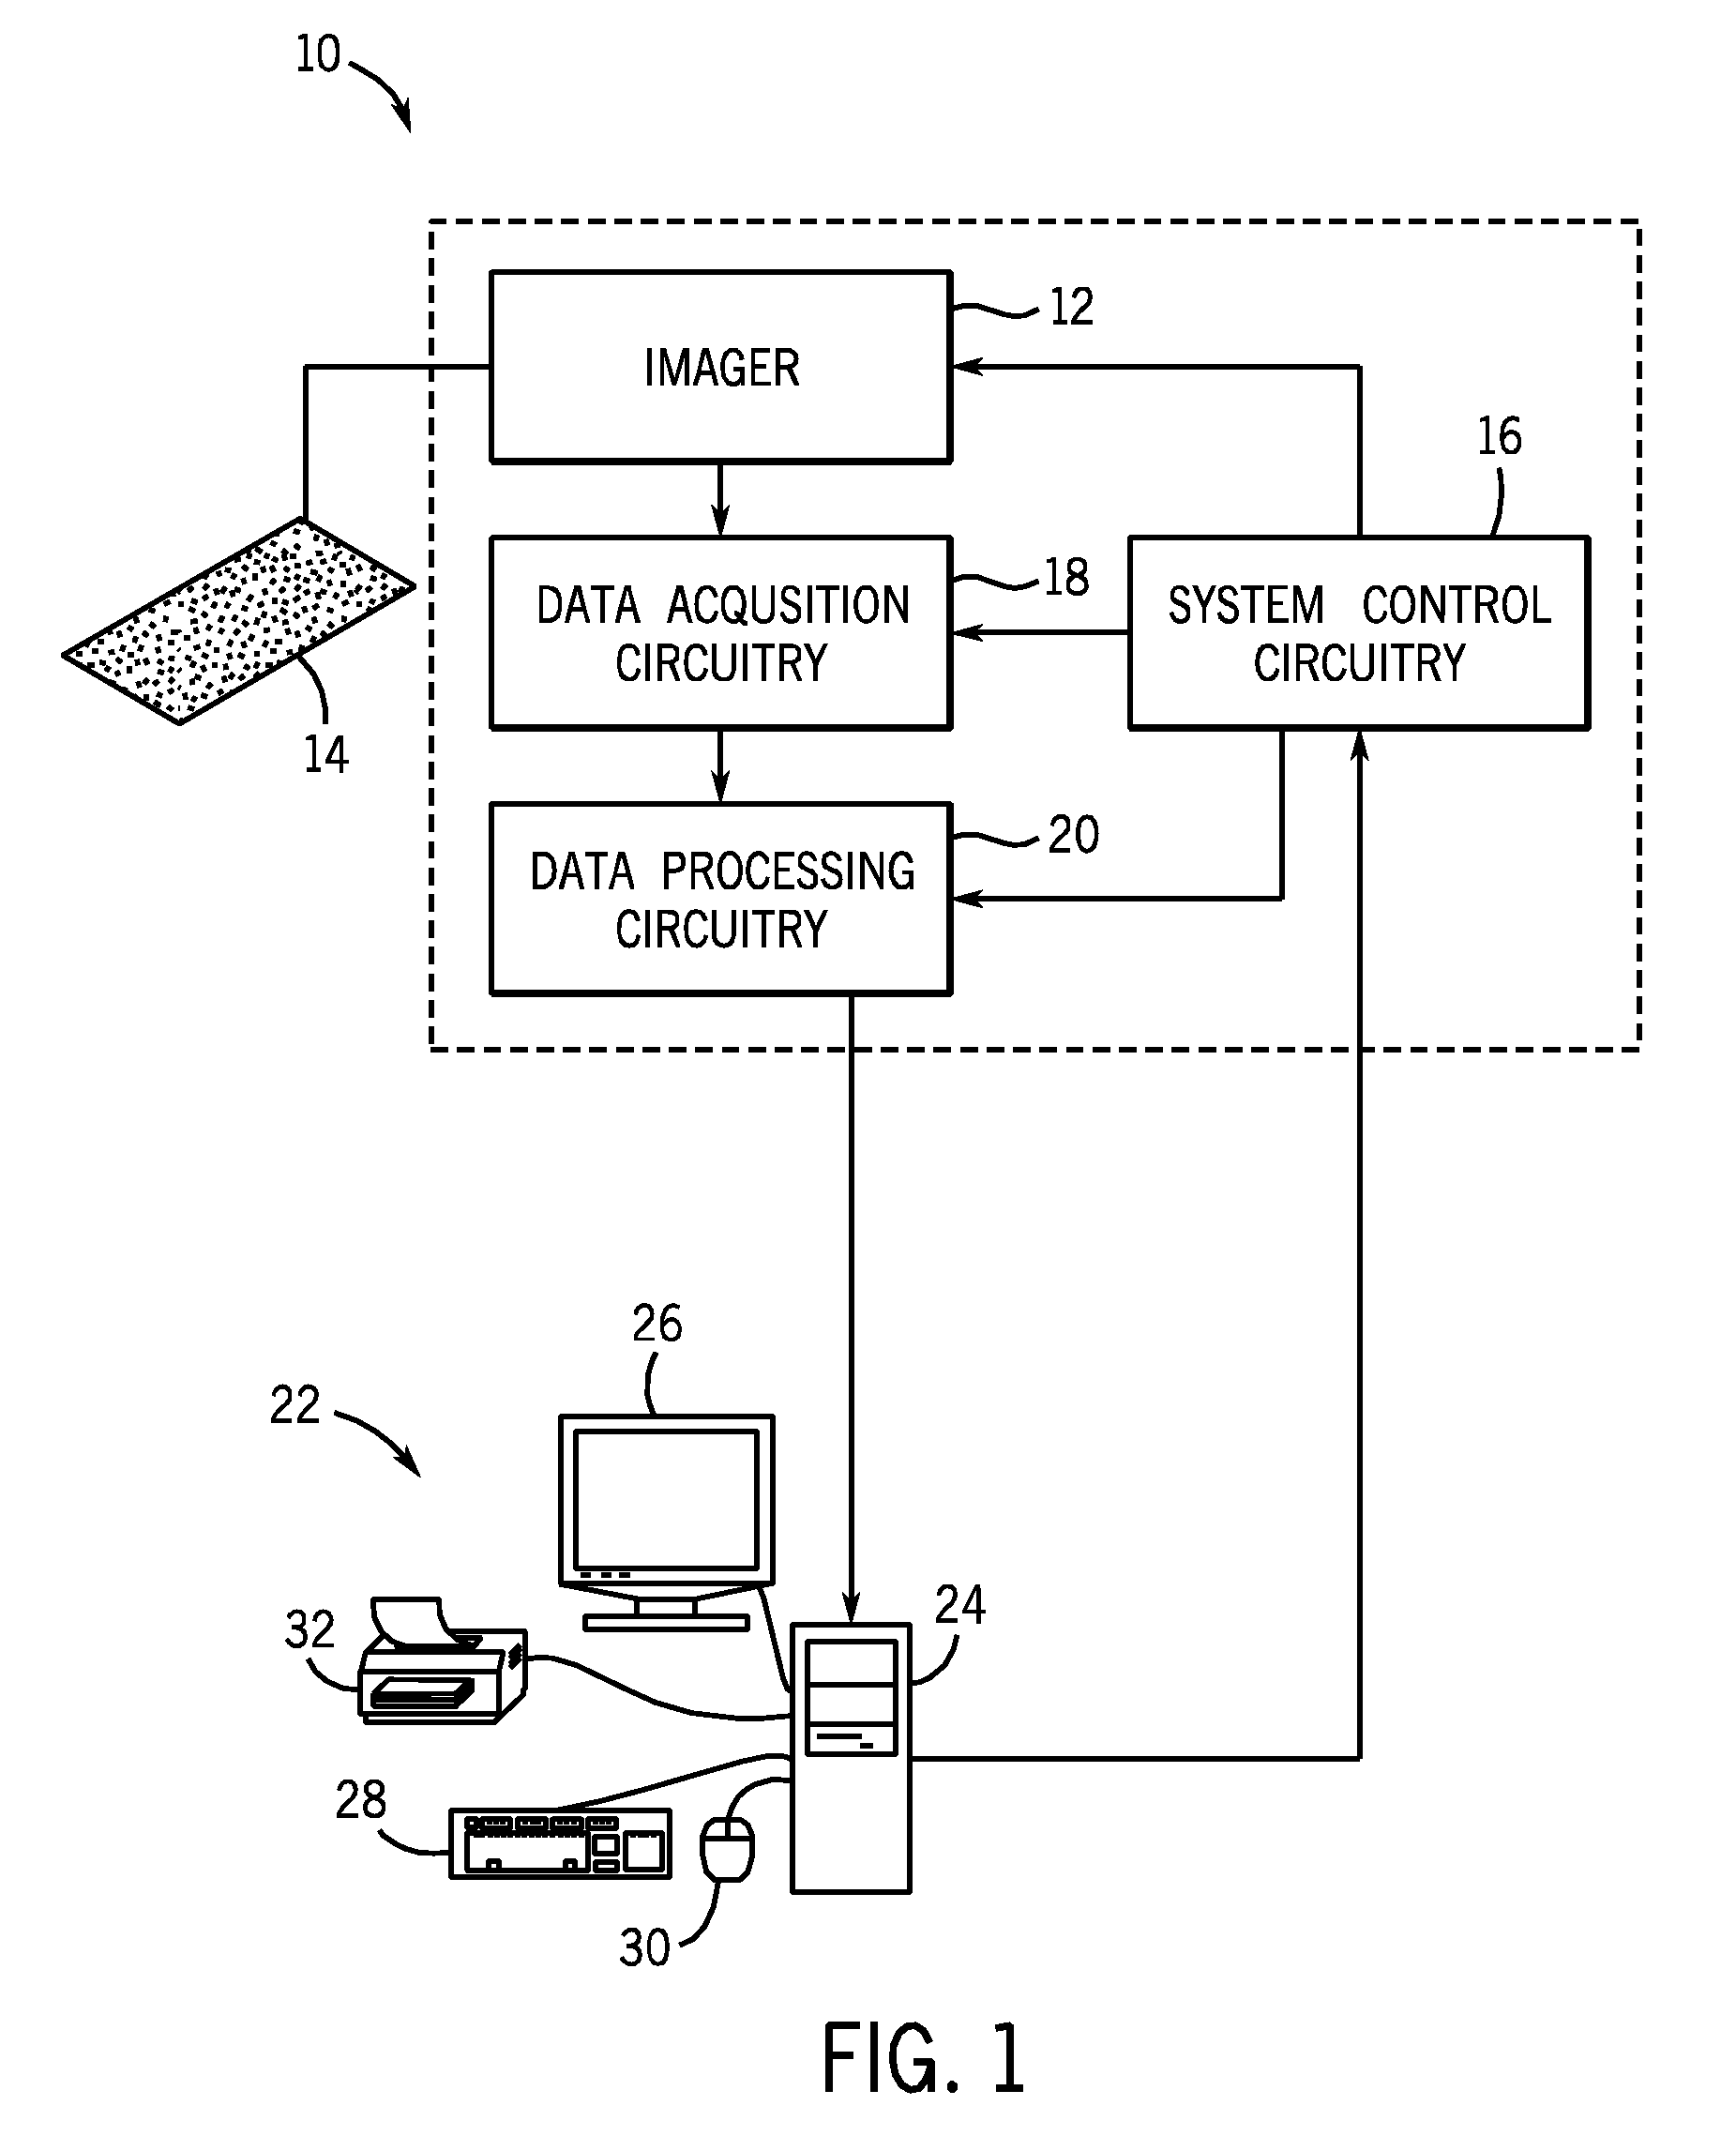 Method and Apparatus for Detecting Irregularities in Tissue Microarrays